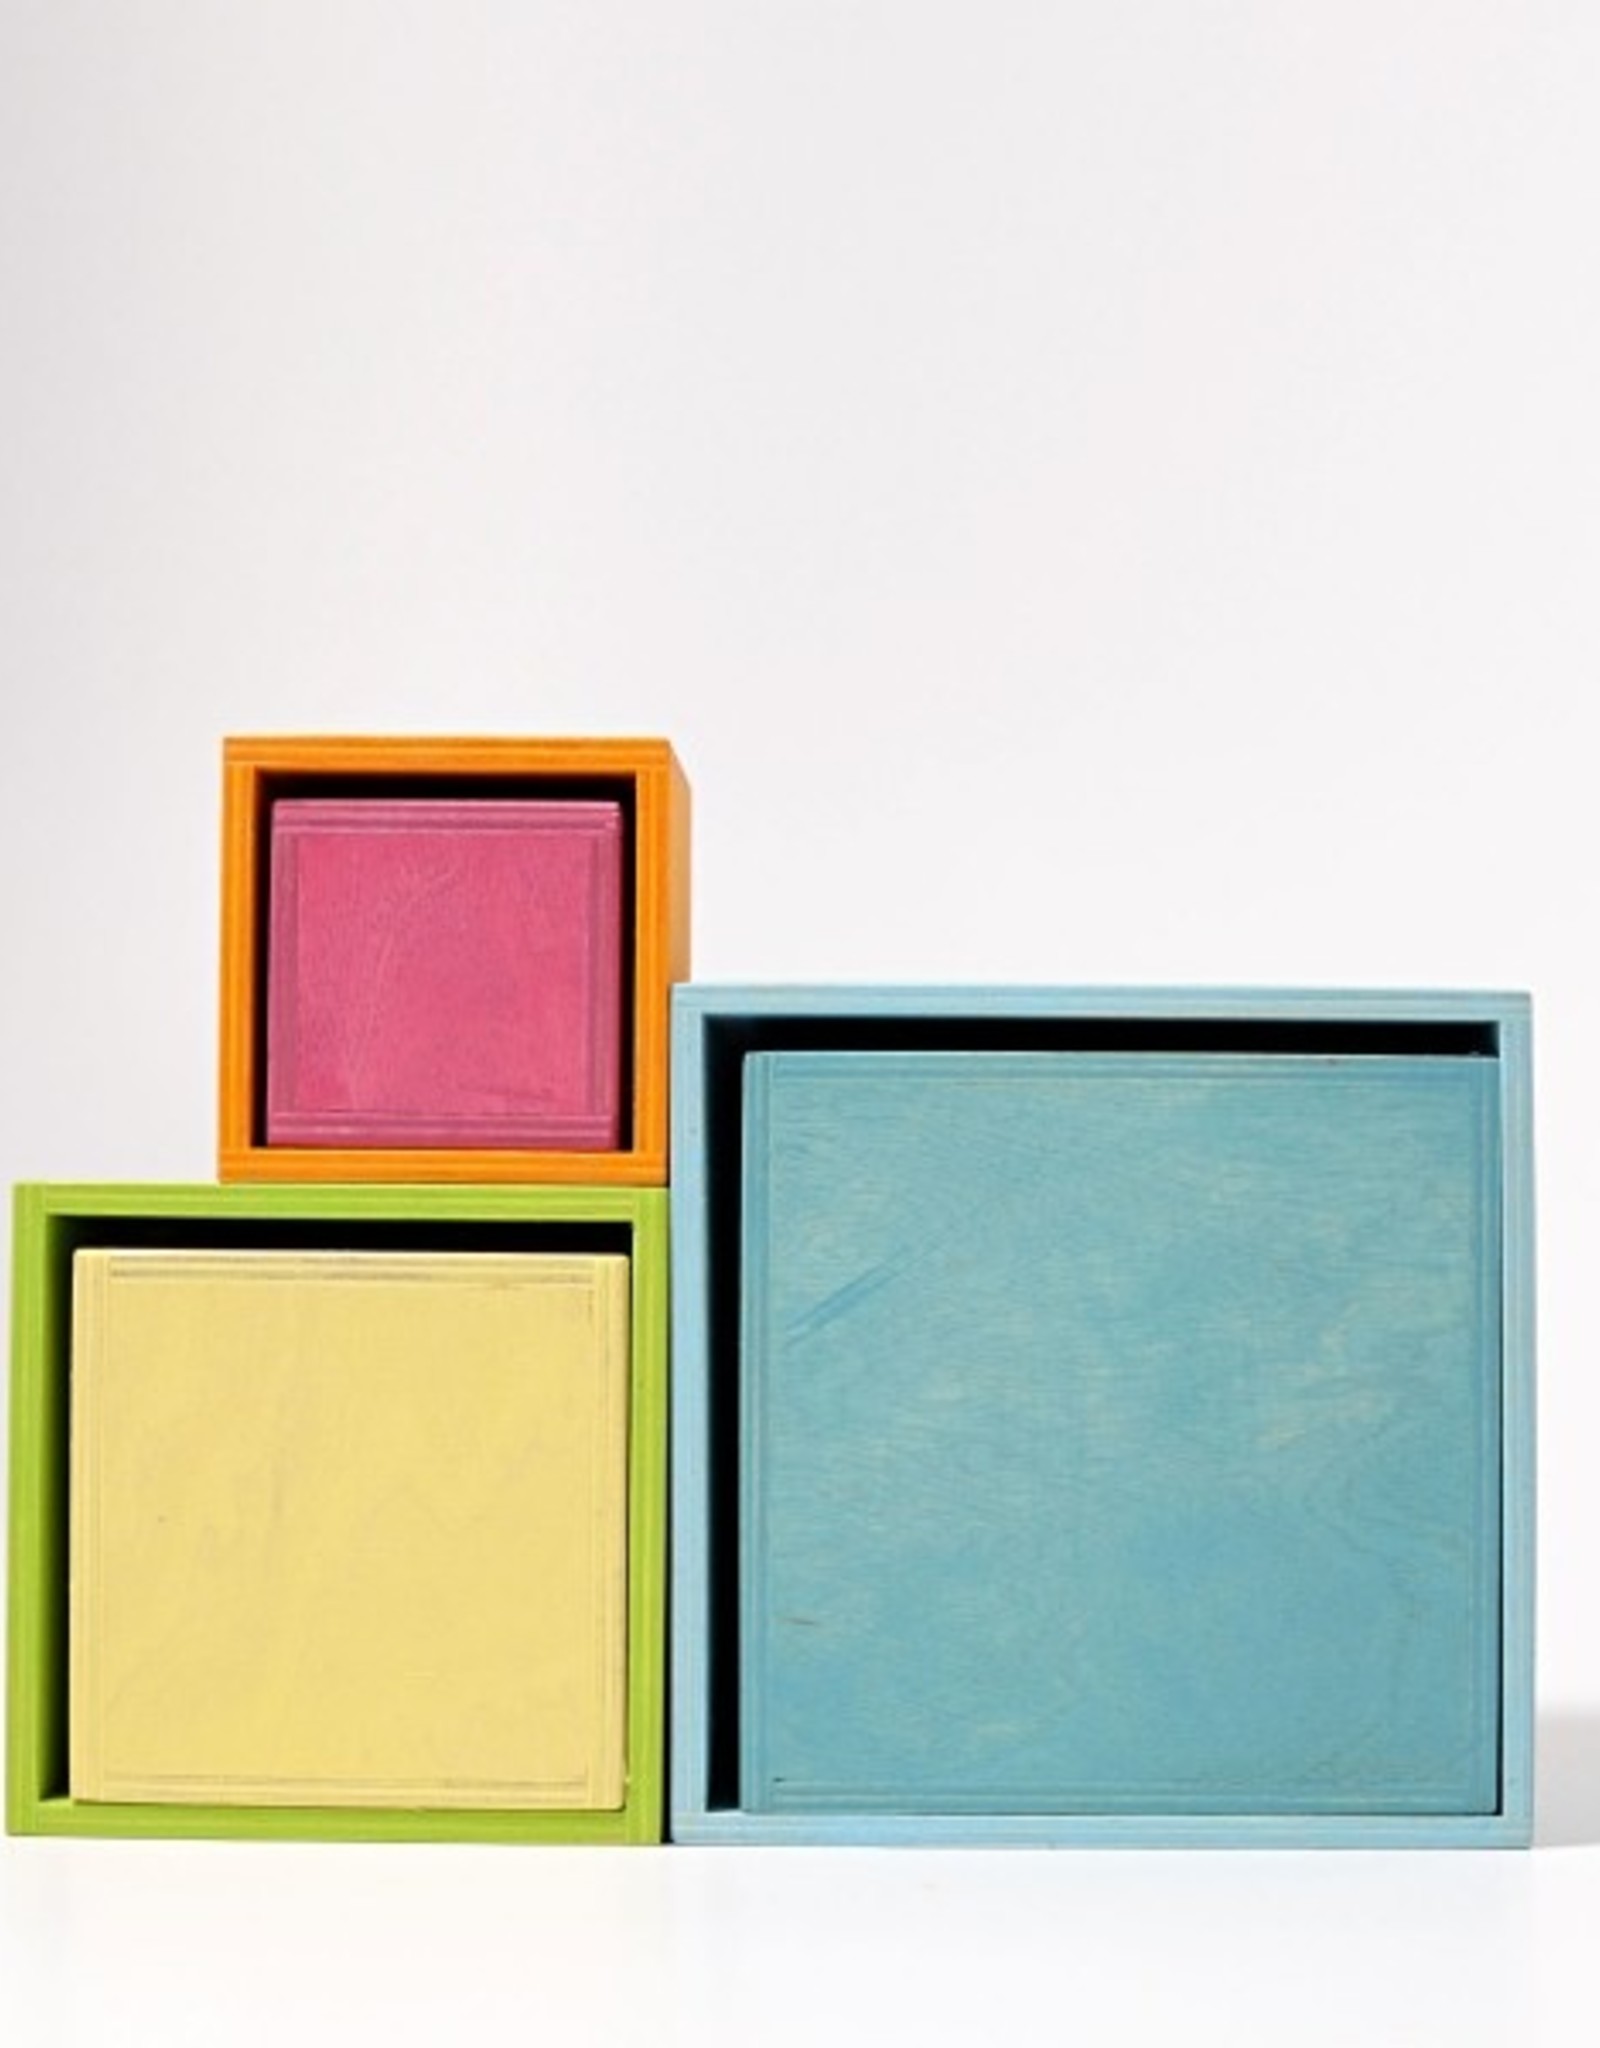 Grimm's Grimm's - Stacking Boxes Large Pastel